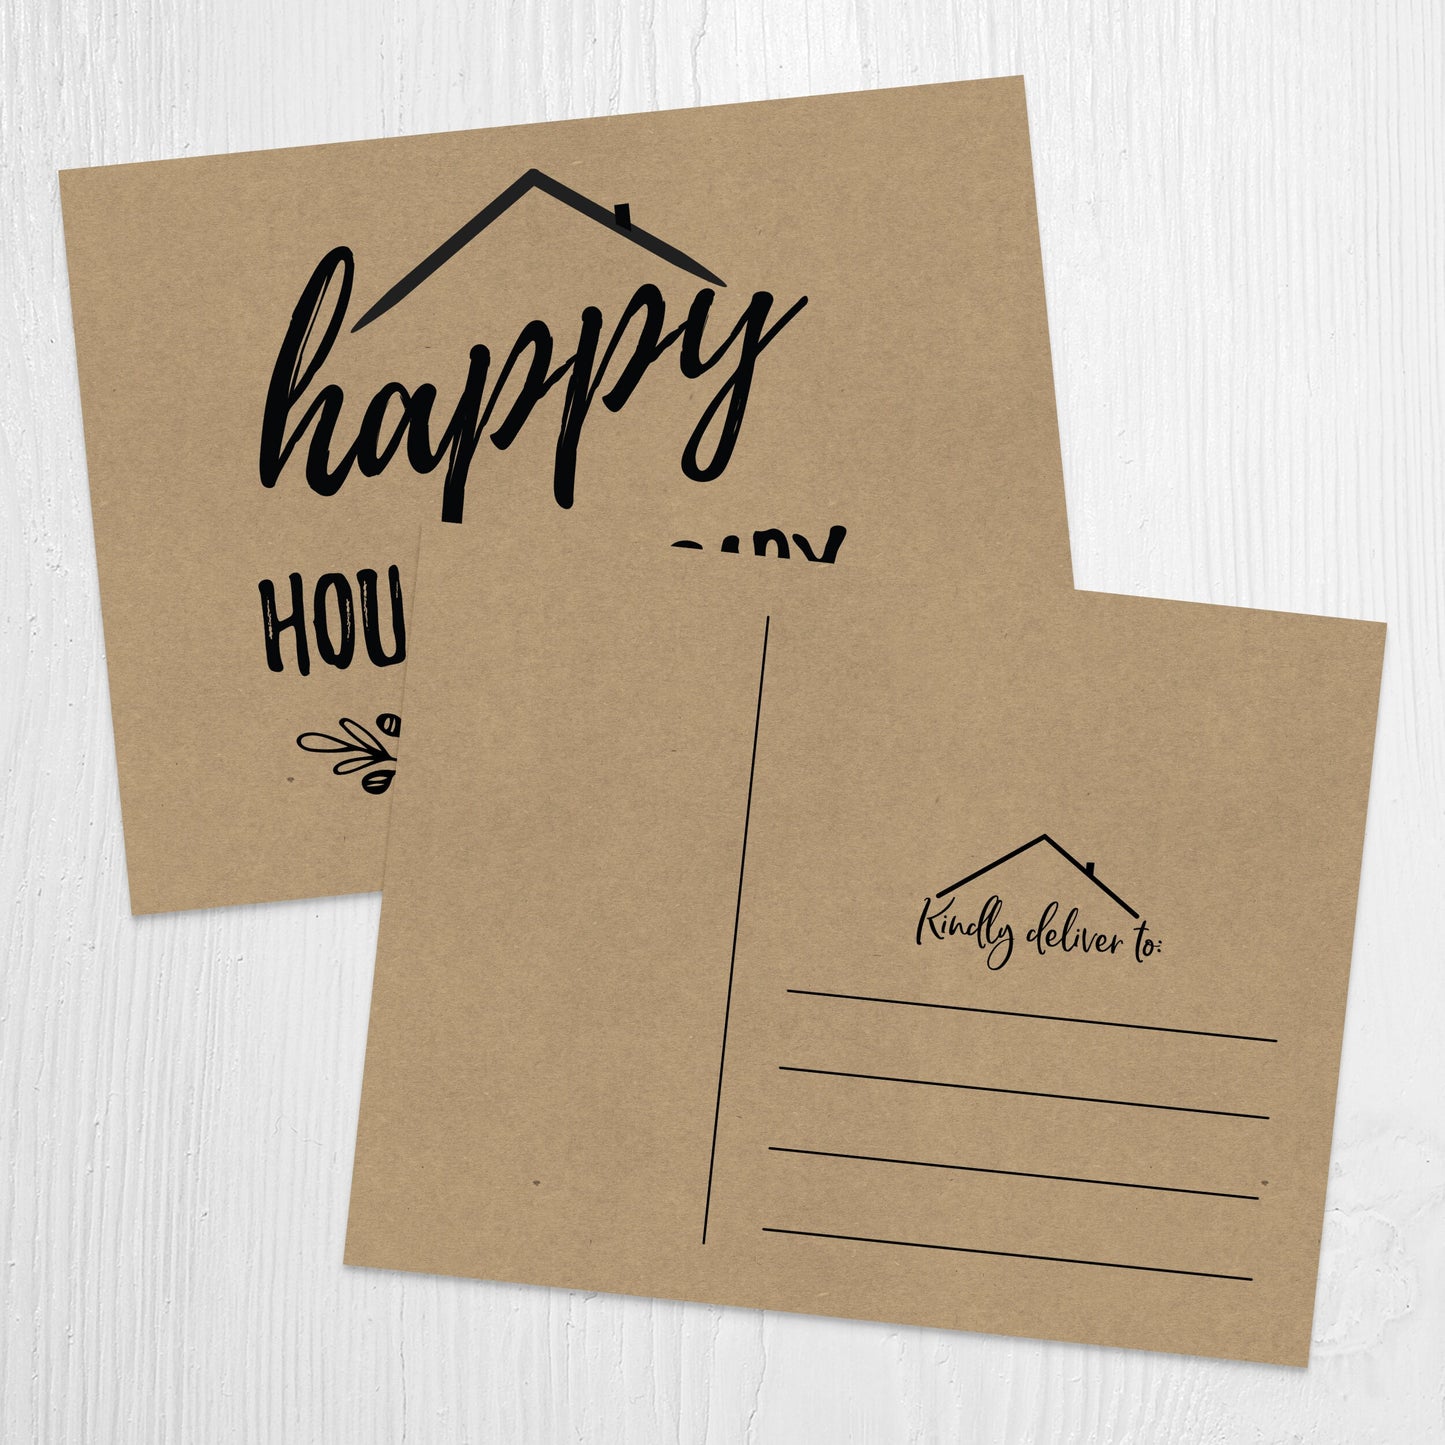 Real Estate Postcard, Happy Houseiversary, Anniversary Cards, Set of Cards, New Home, Handmade Cards, Home Anniversary